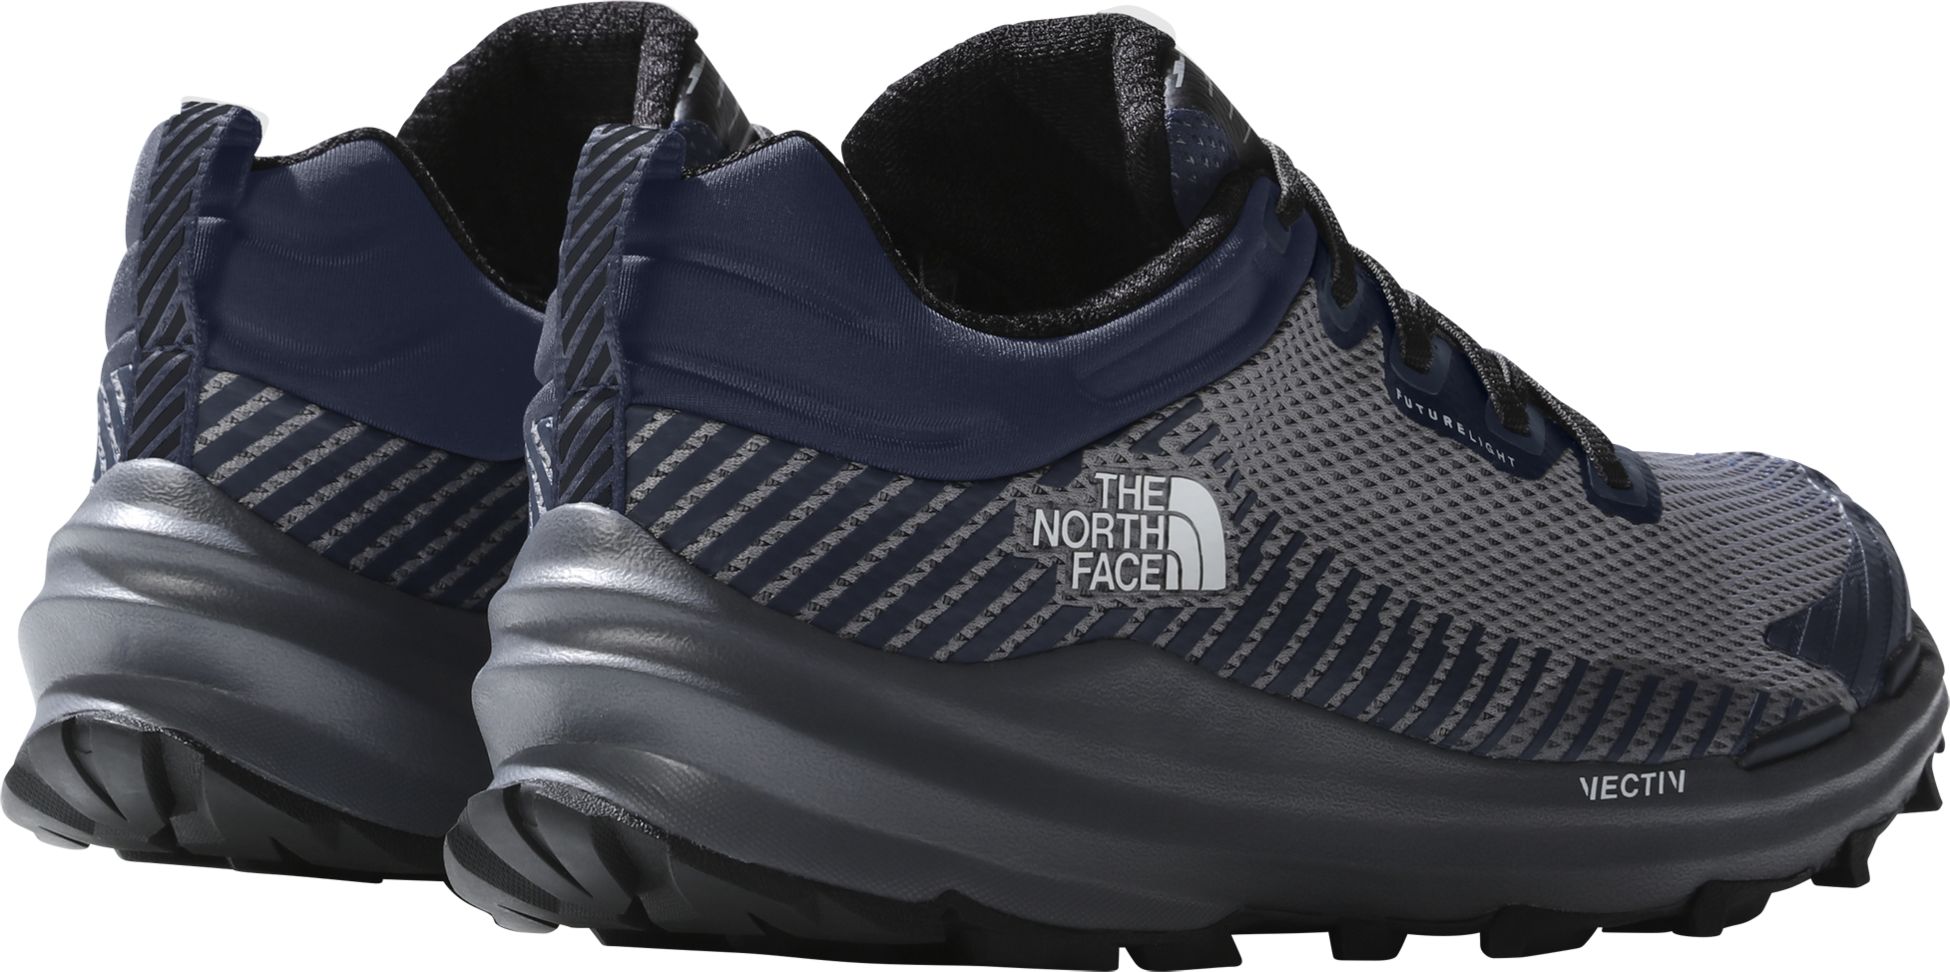 THE NORTH FACE, M VECTIV FASTPACK FUTURELIGHT